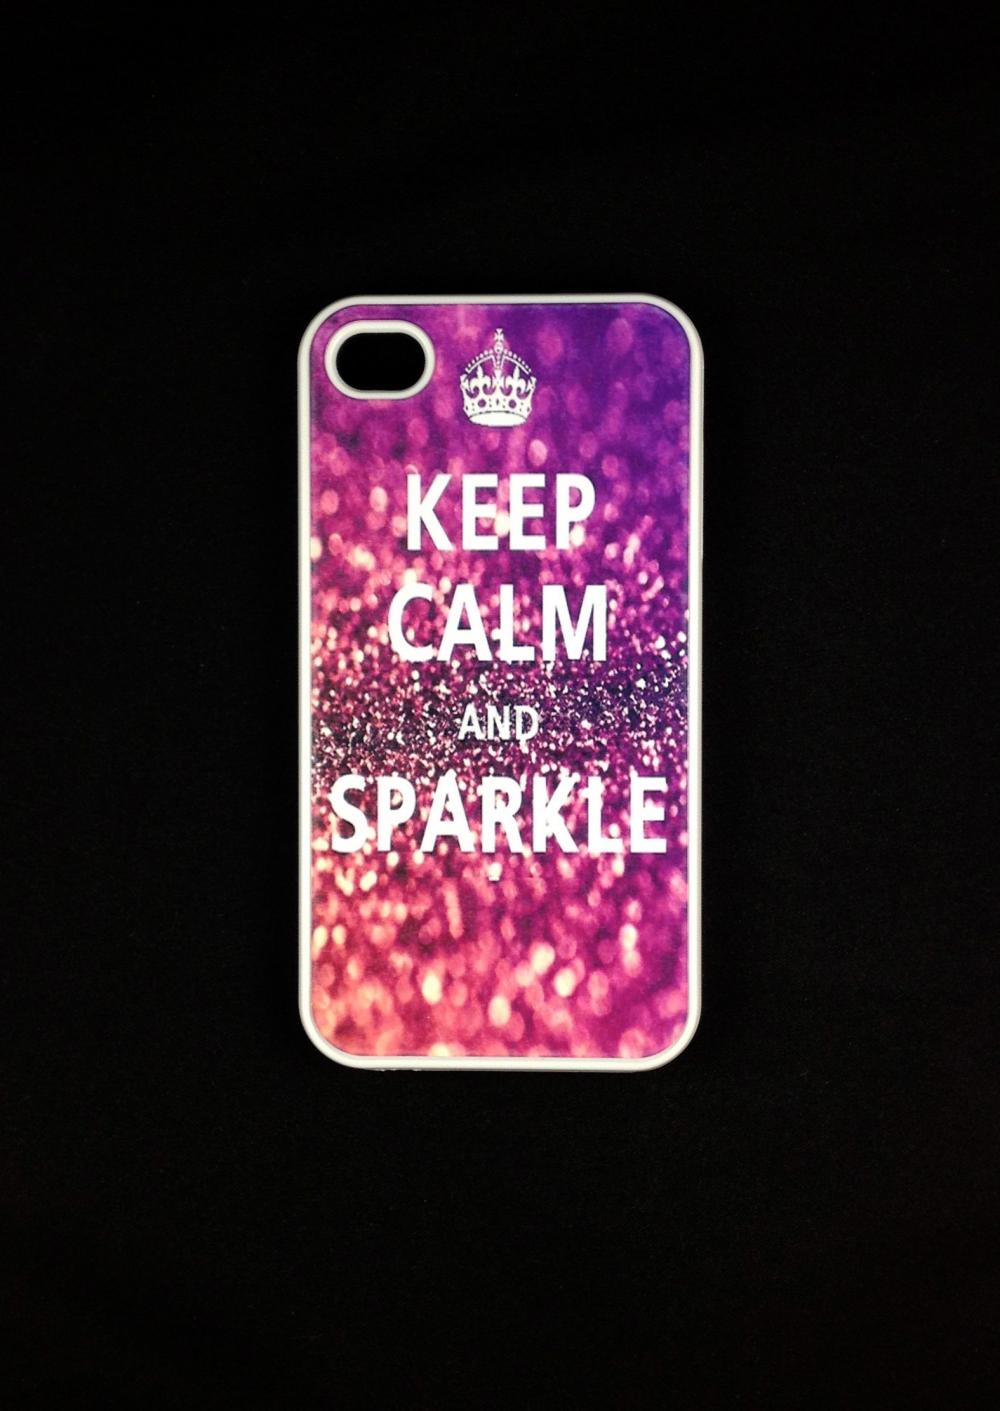 Iphone 4 Case - Keep Calm Sparkle Iphone 4s Case, Iphone Case, Iphone 4 Cover